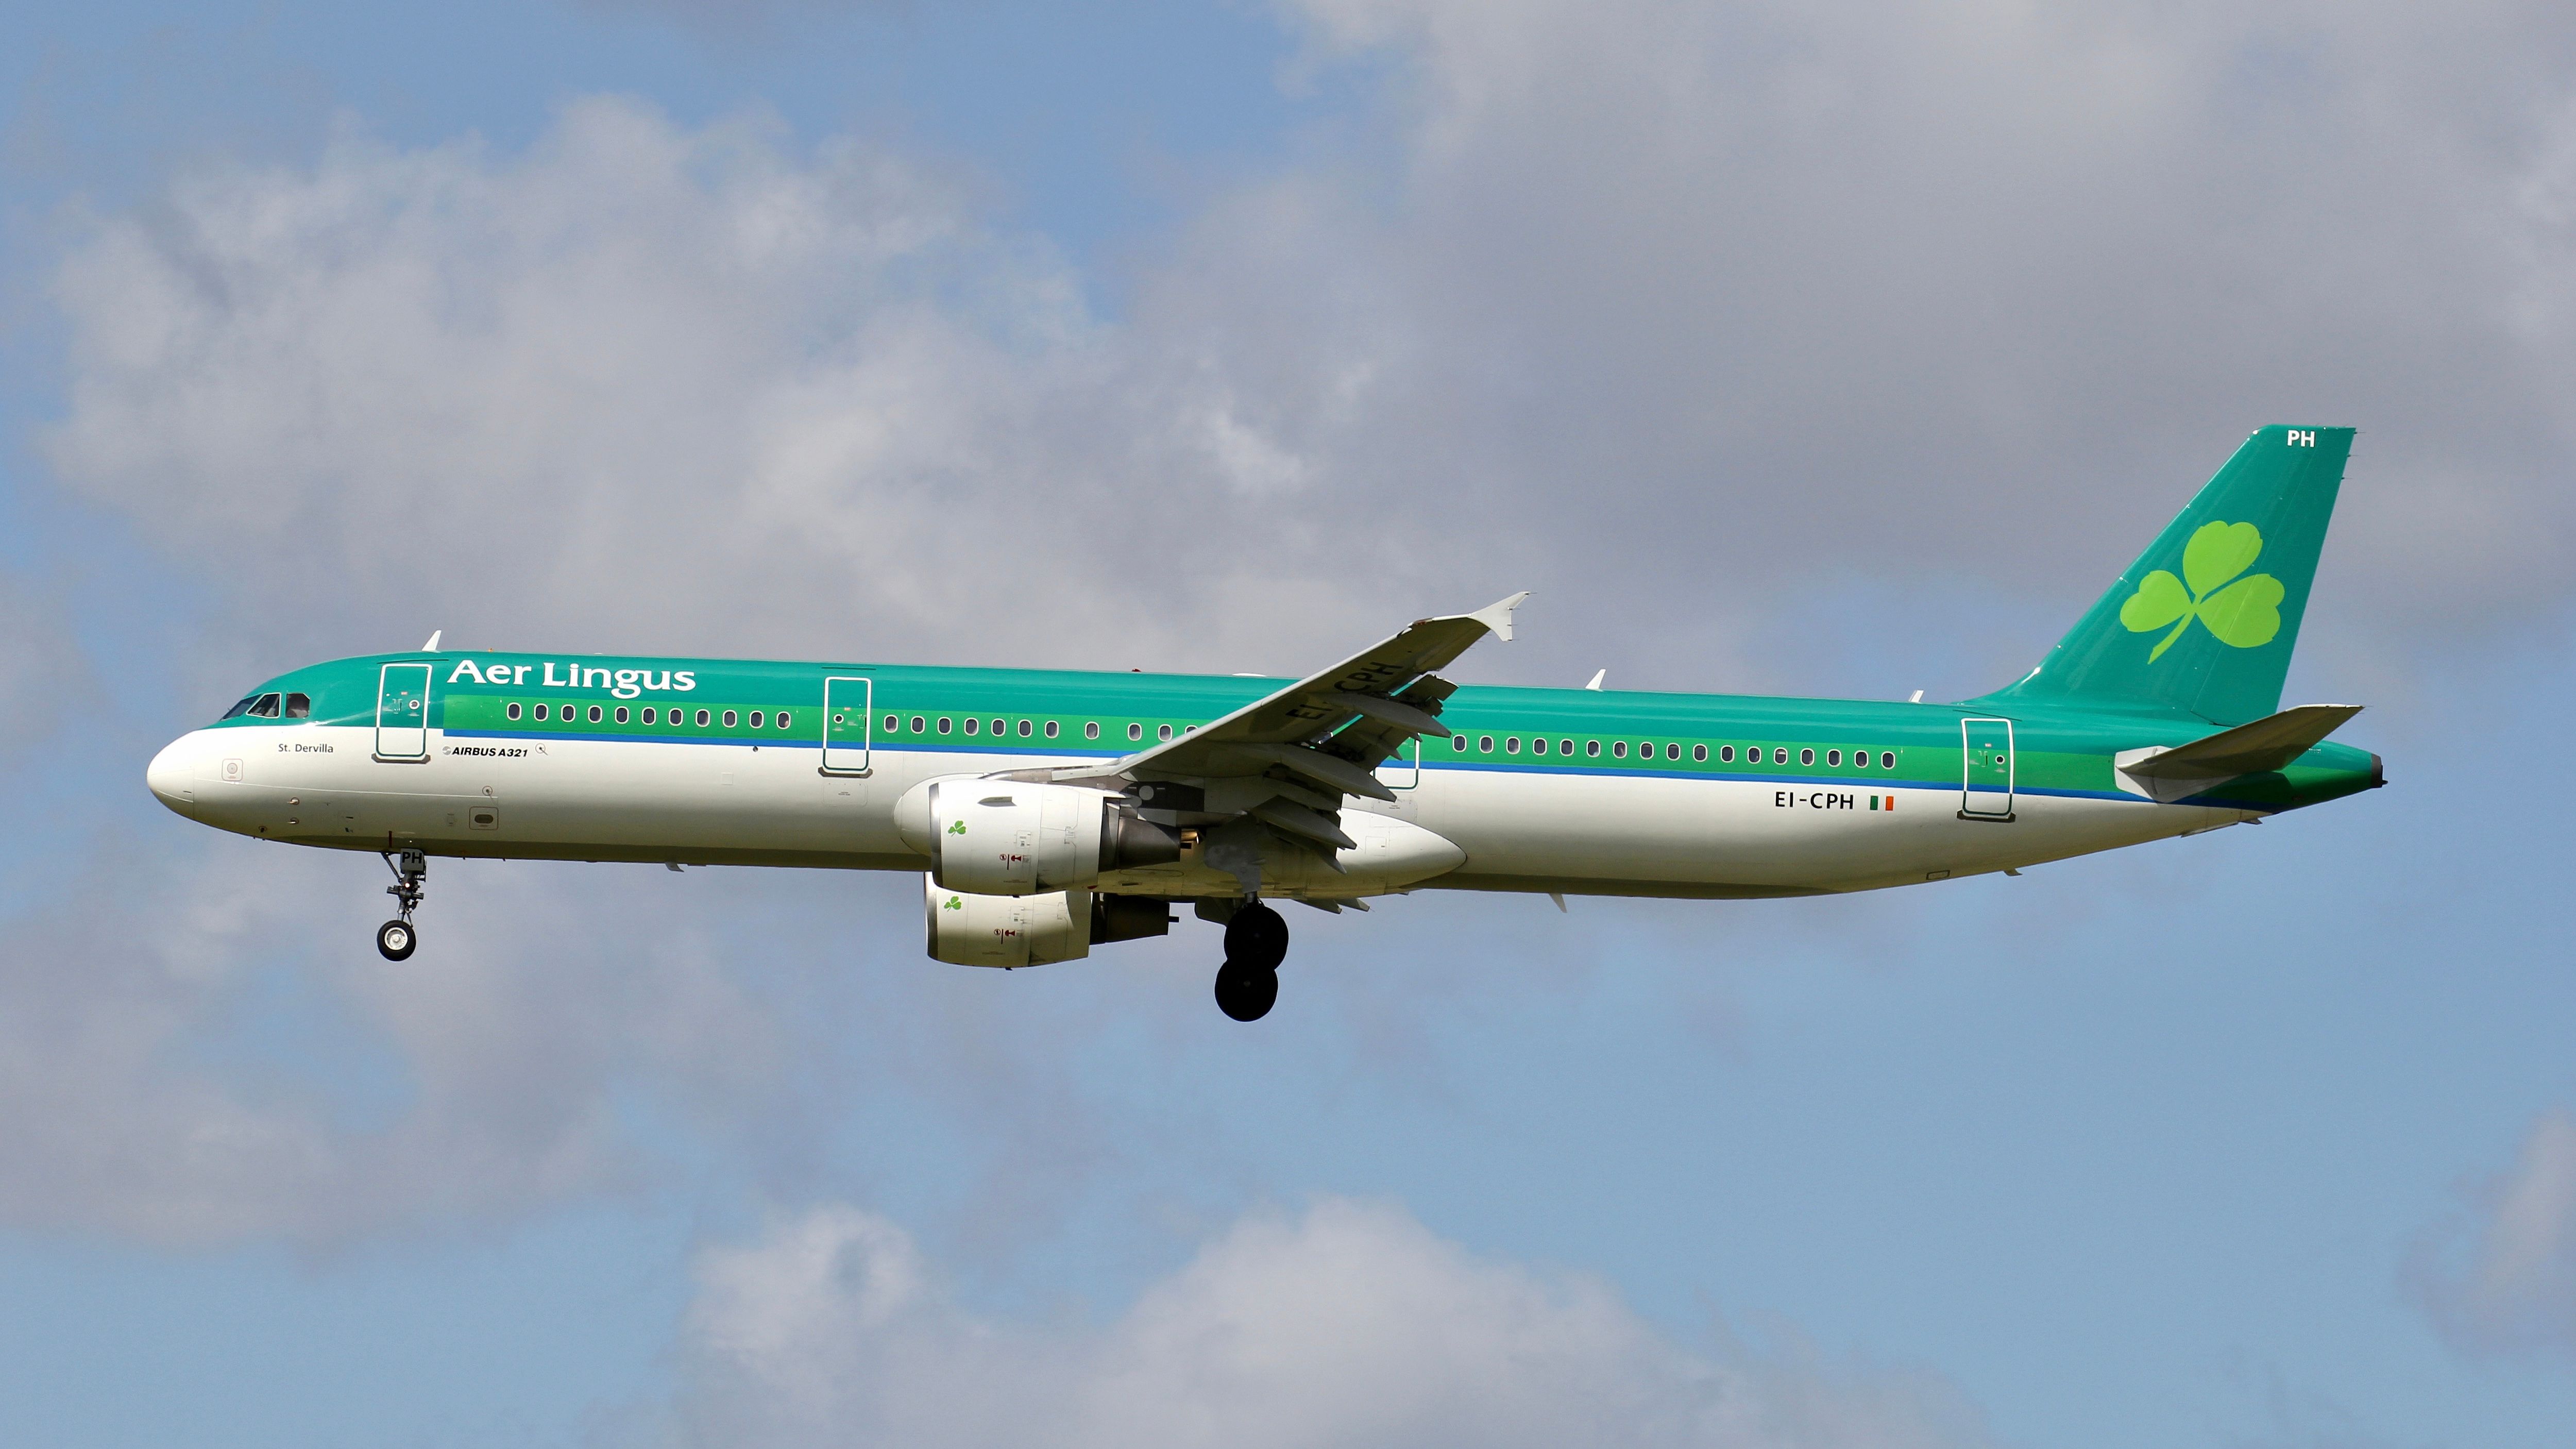 Aer Lingus A321-200 in the sky